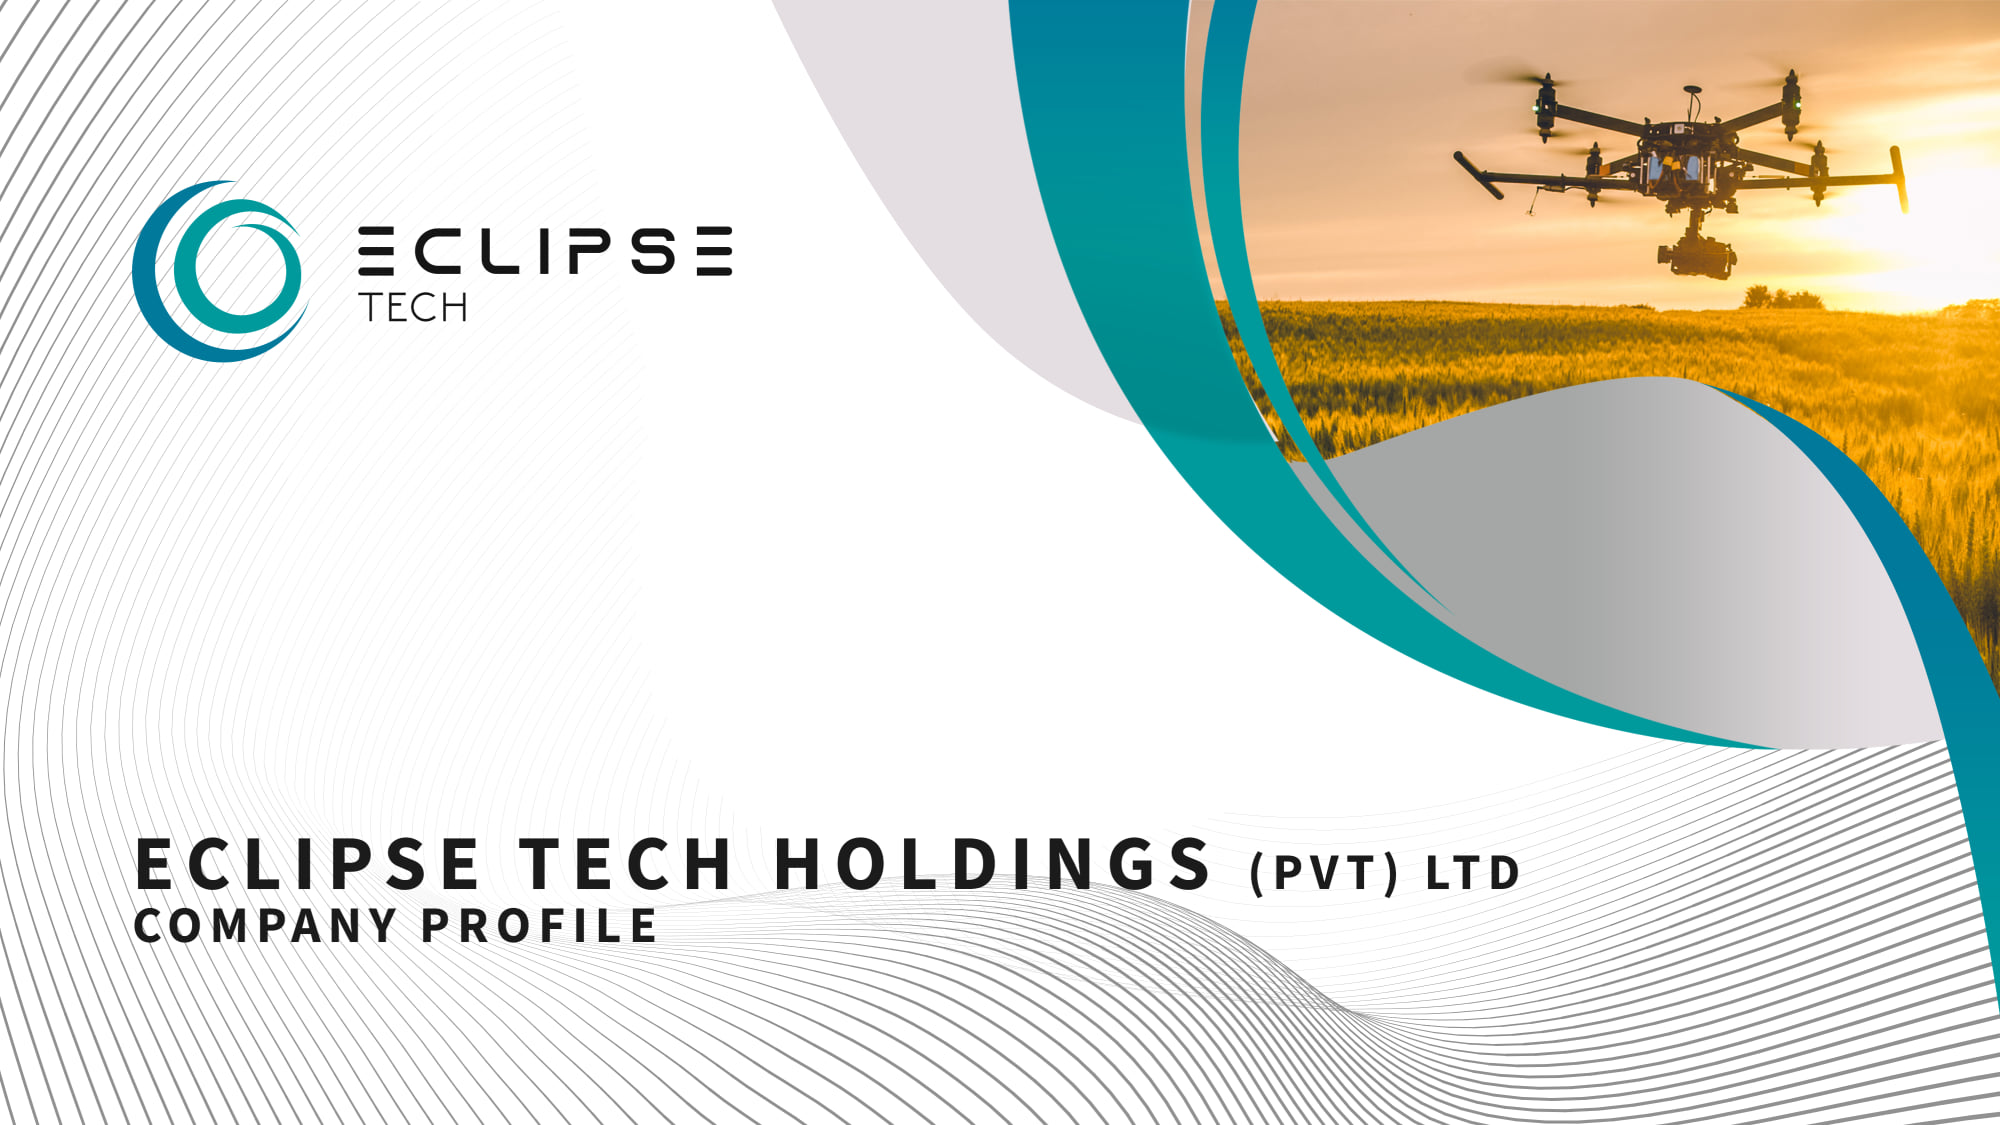 Eclipsetech Holdings Posts